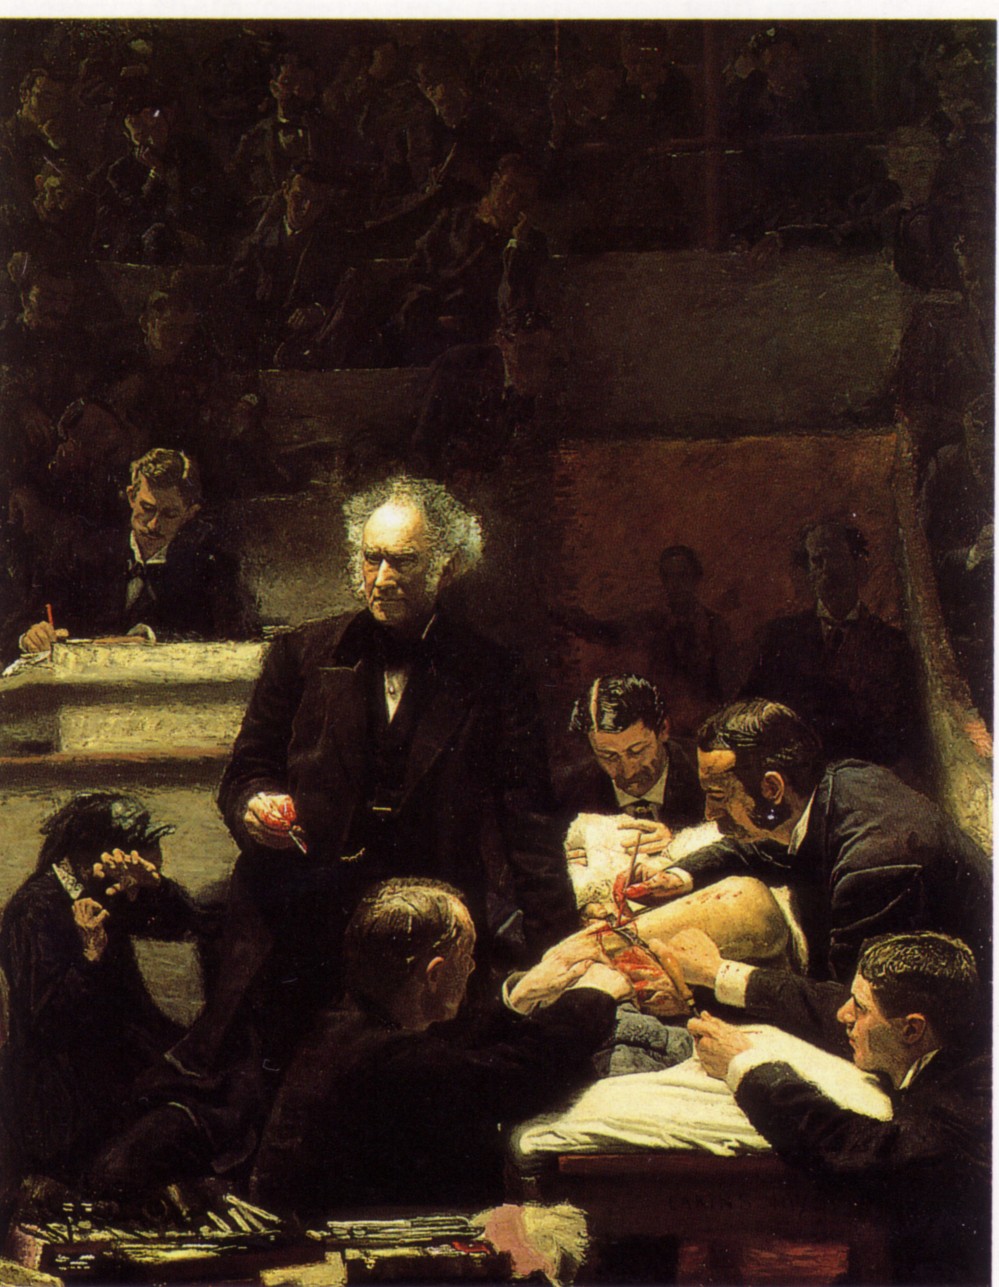 Thomas Eakins The Gross Clinic 1875